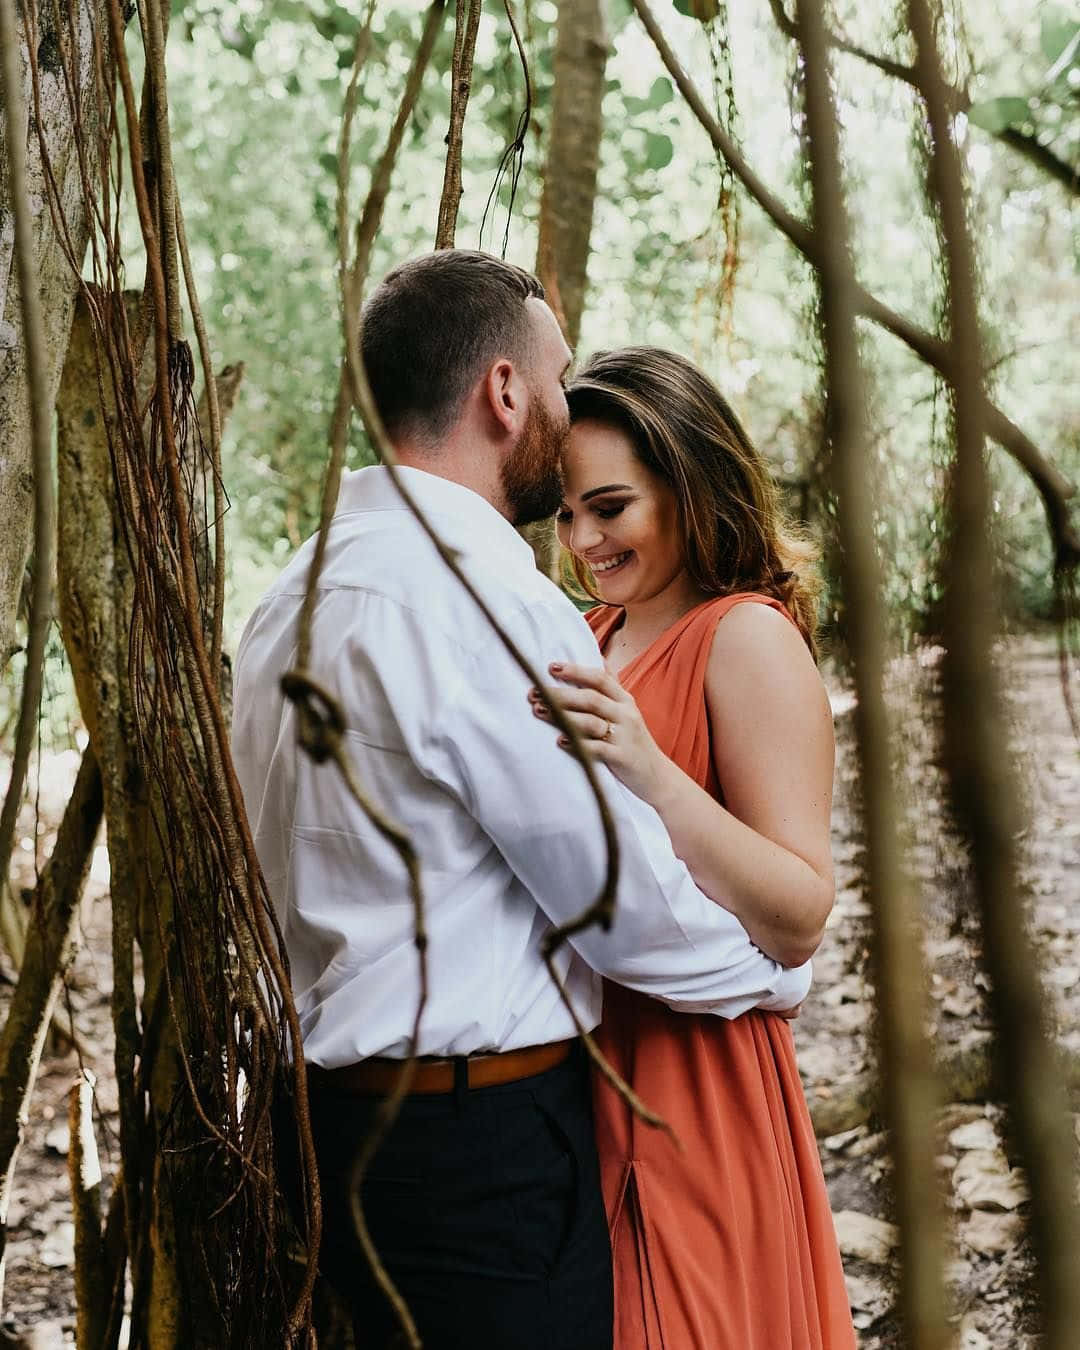 A Couple Embraces In The Woods During Their Engagement Session